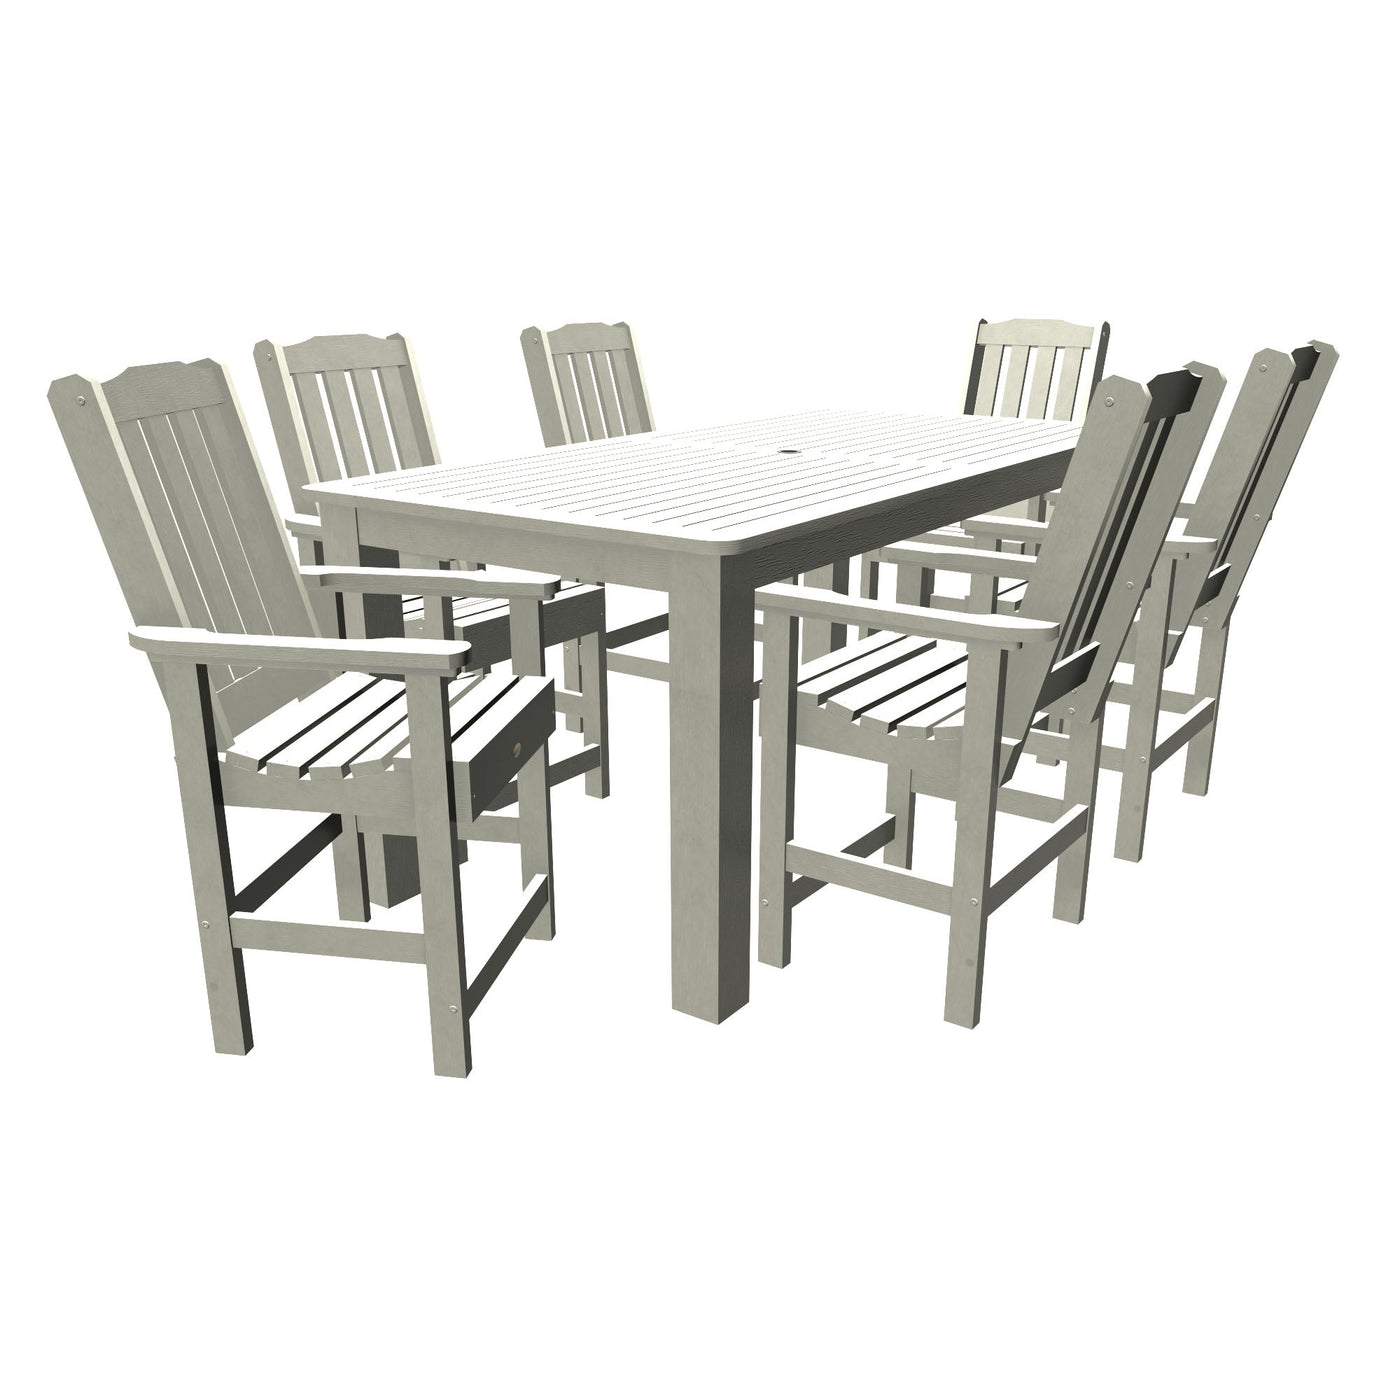 Lehigh 7pc Rectangular Outdoor Dining Set 42in x 84in - Counter Height Dining Highwood USA White 